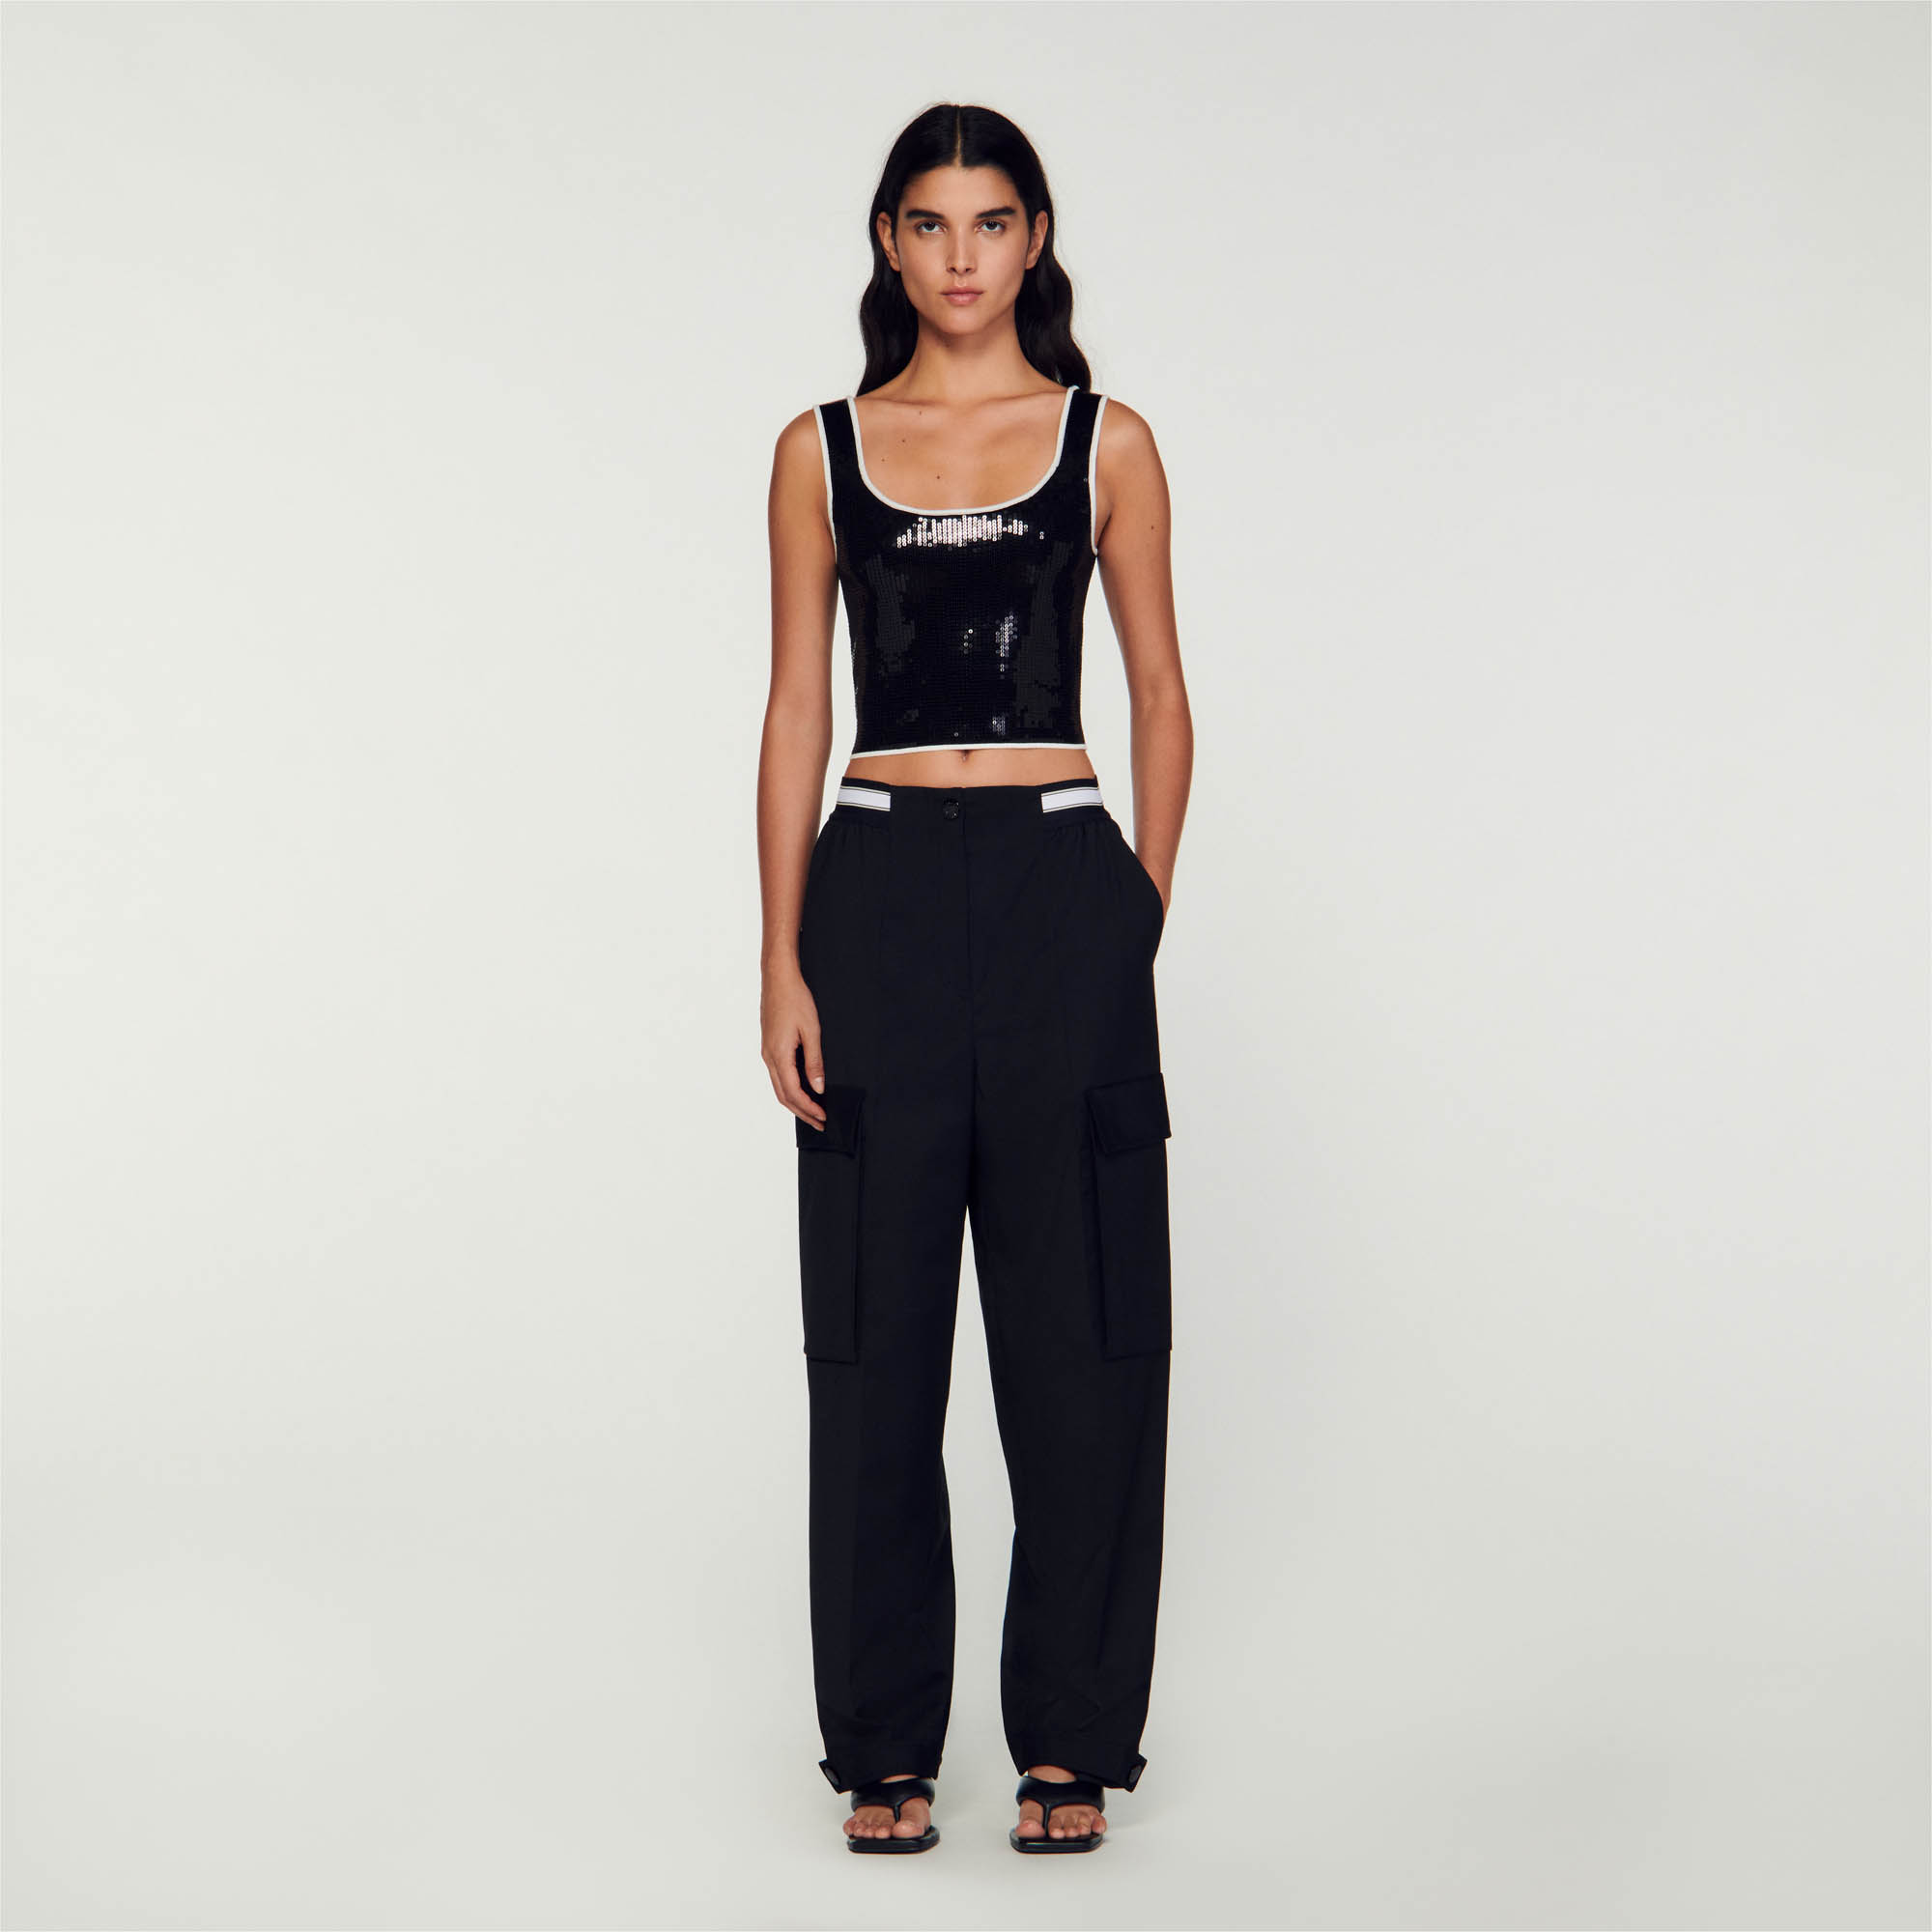 Sandro viscose Cropped knit sleeveless bralette-style top with all-over sequin embellishment, a round neckline, and contrasting trim around the edges